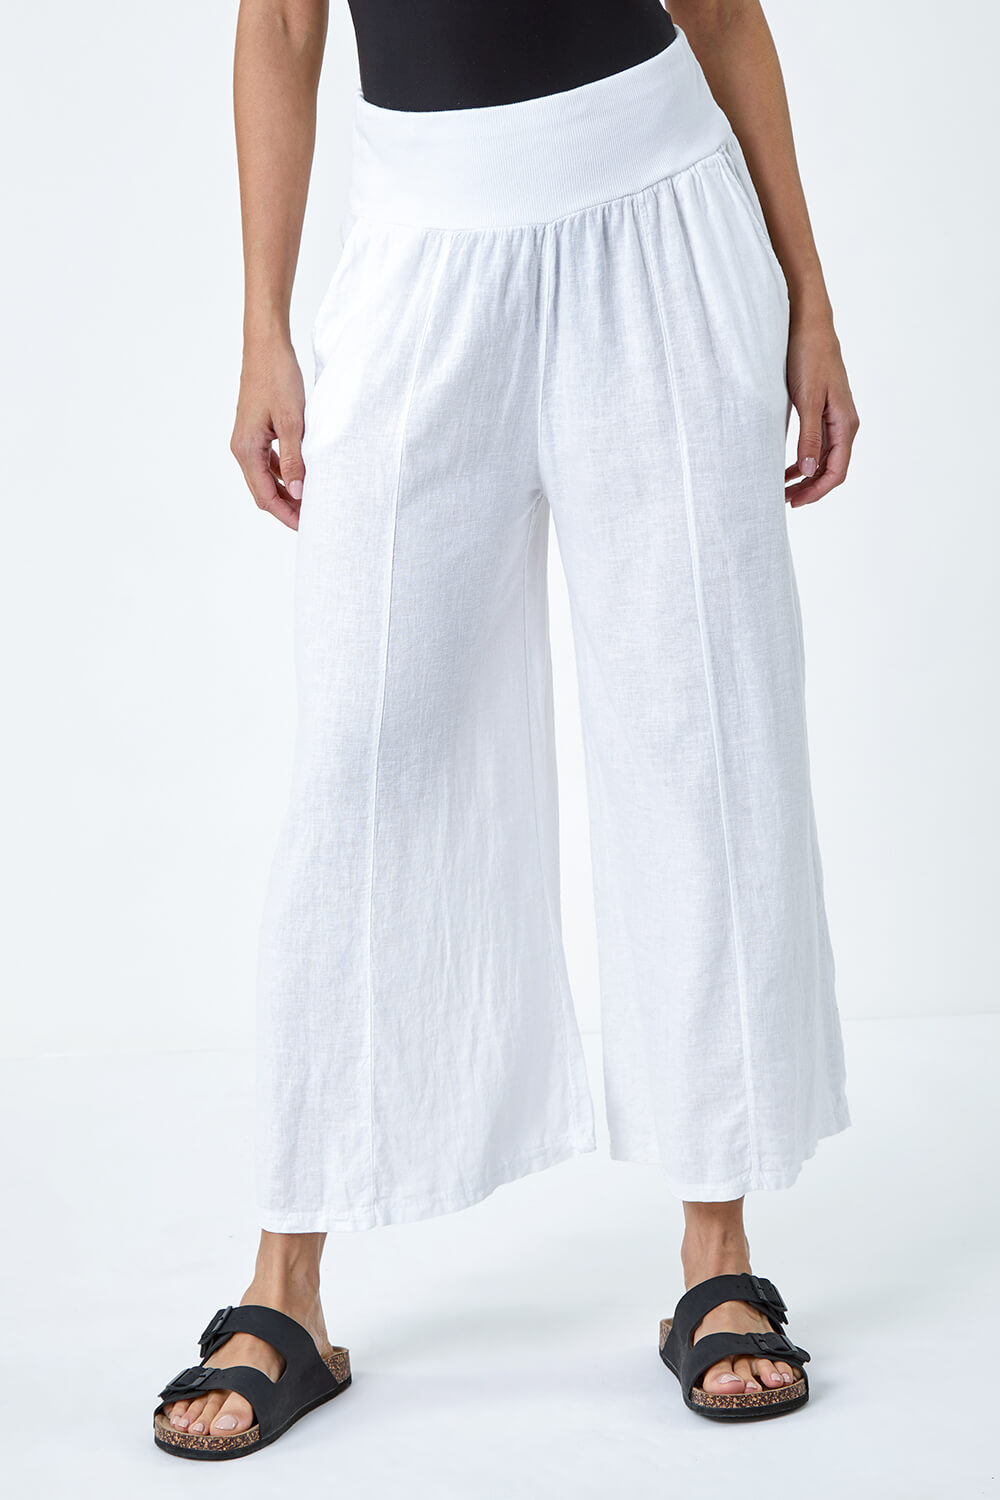 White Linen Blend Stretch Waist Culottes, Image 4 of 5